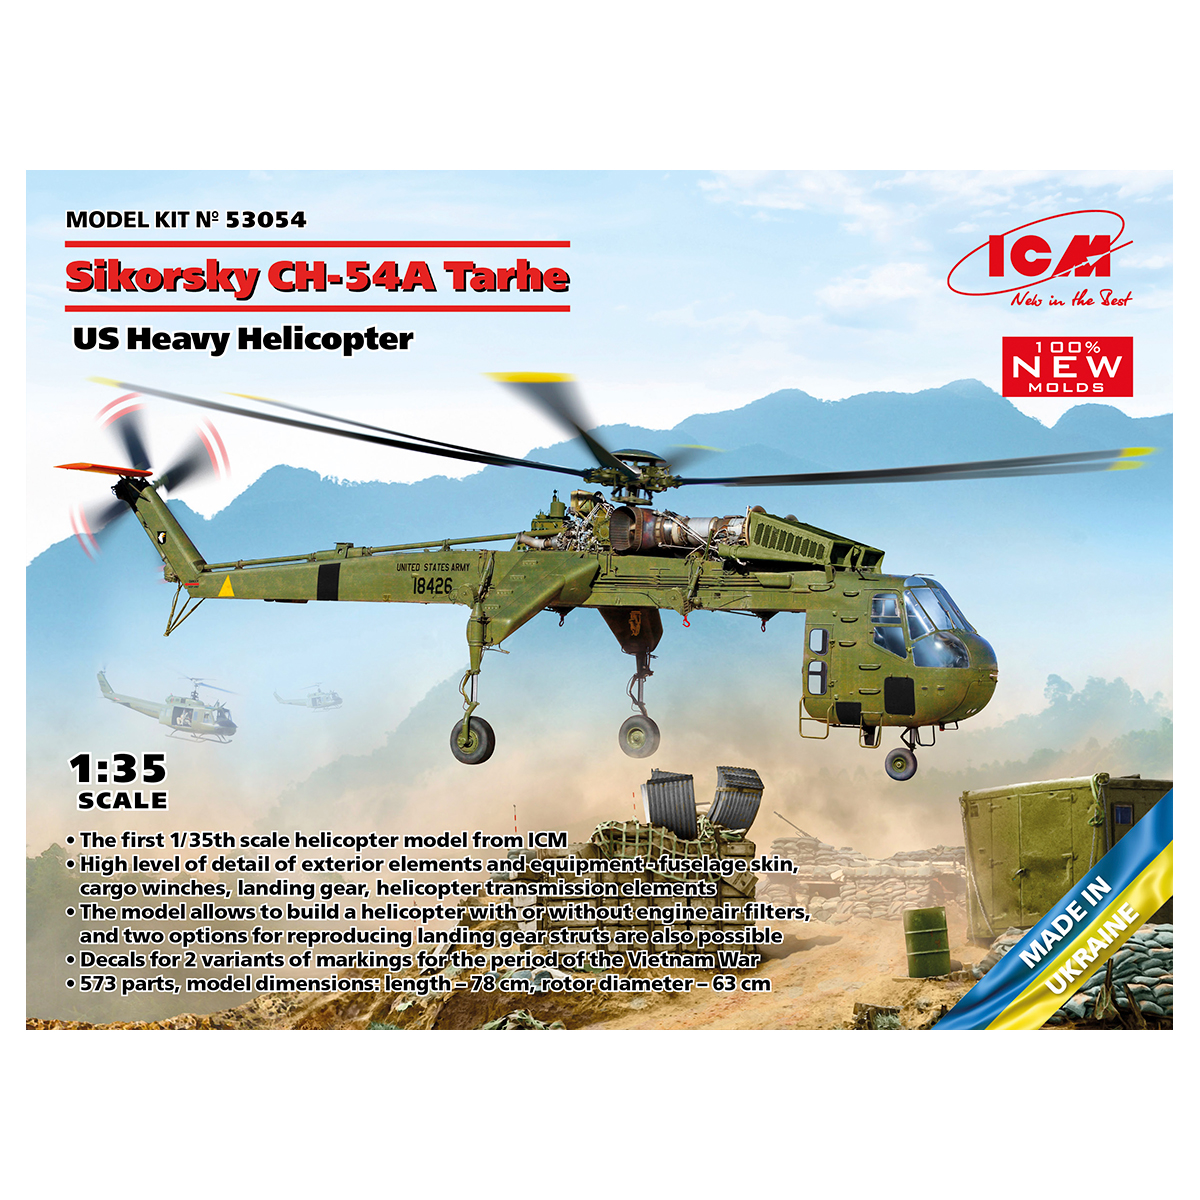 Sikorsky CH-54A Tarhe, US Heavy Helicopter (100% new molds) 1/35